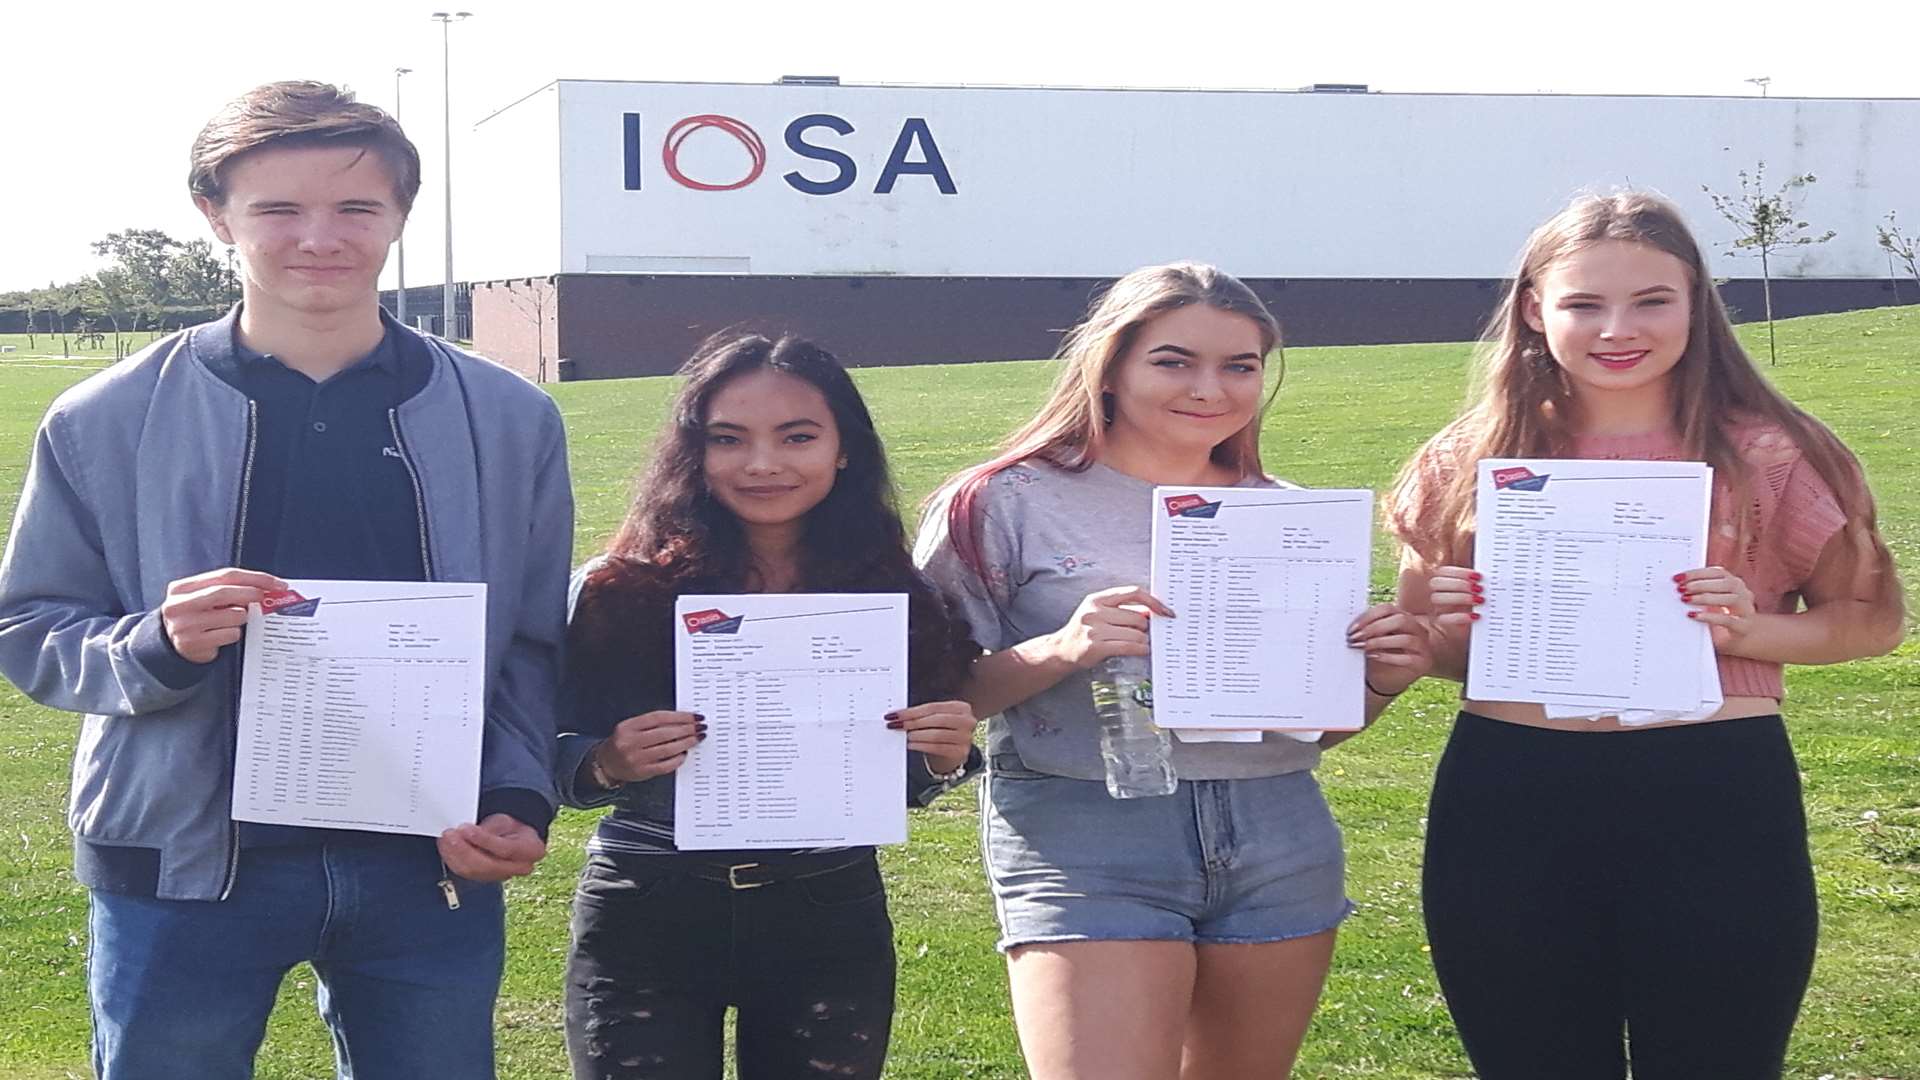 Peter Park, Zhanelle Morgan, Chloe Haggis and Patrycja Kowalska with their results.